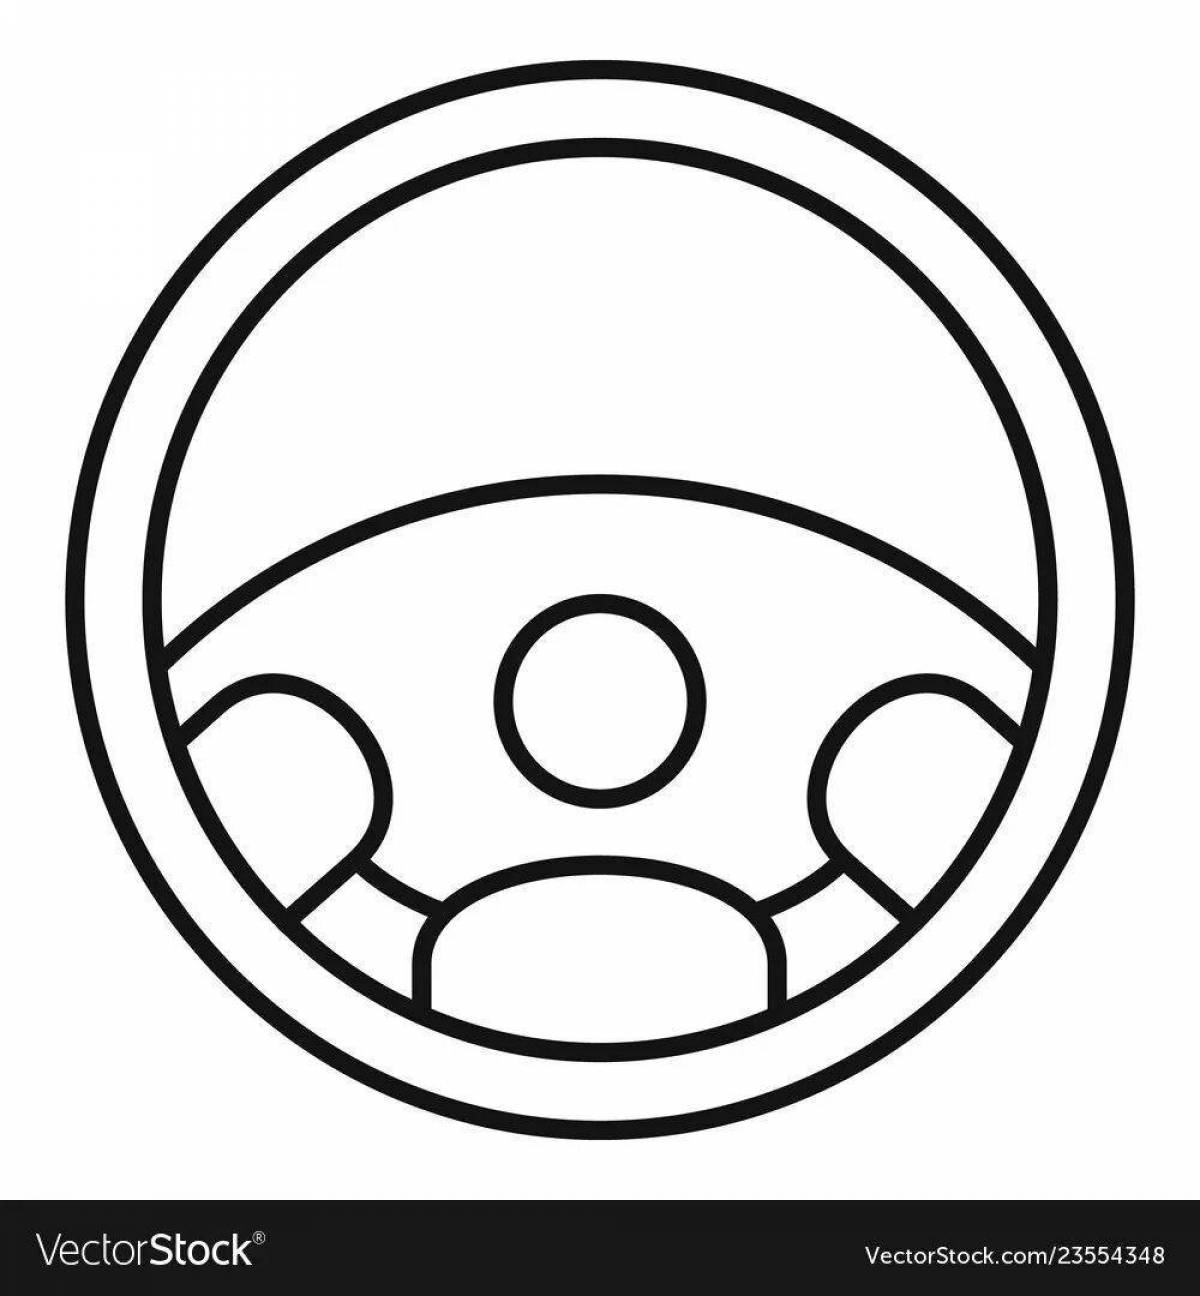 Fun coloring of the steering wheel for a children's car